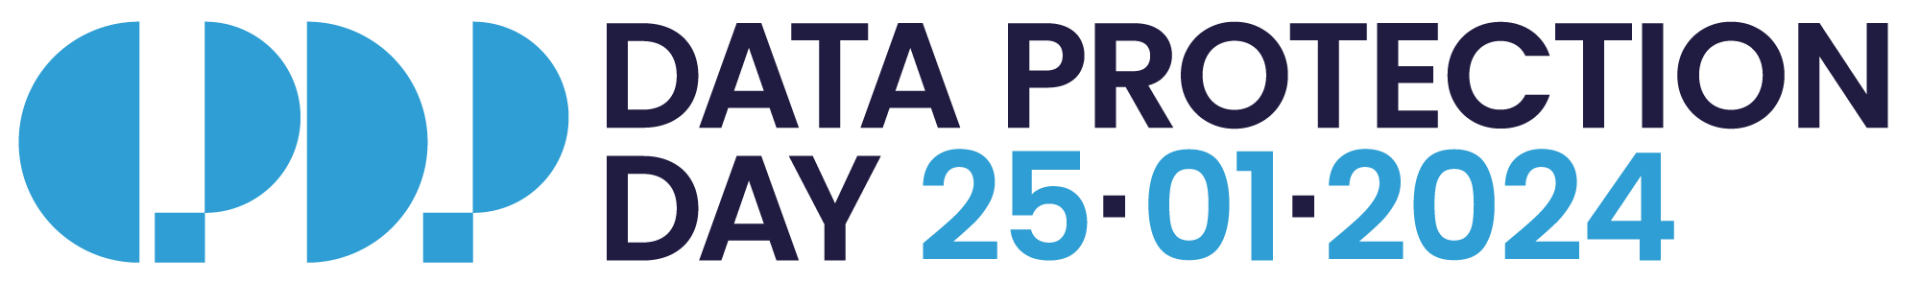 Data protection day CPDP.png